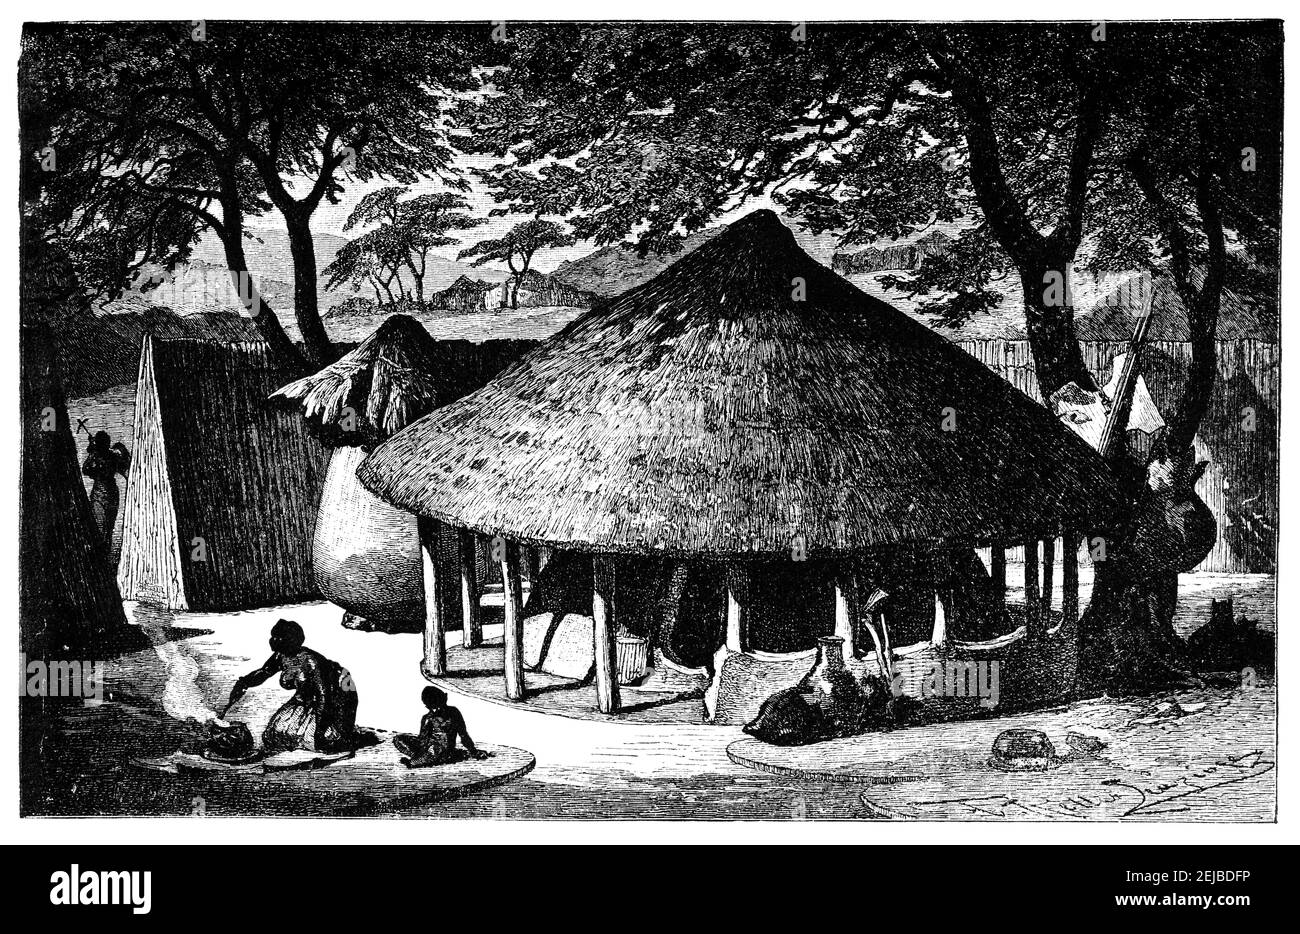 South African village.Culture and history of Africa. Vintage antique black and white illustration. 19th century. Stock Photo